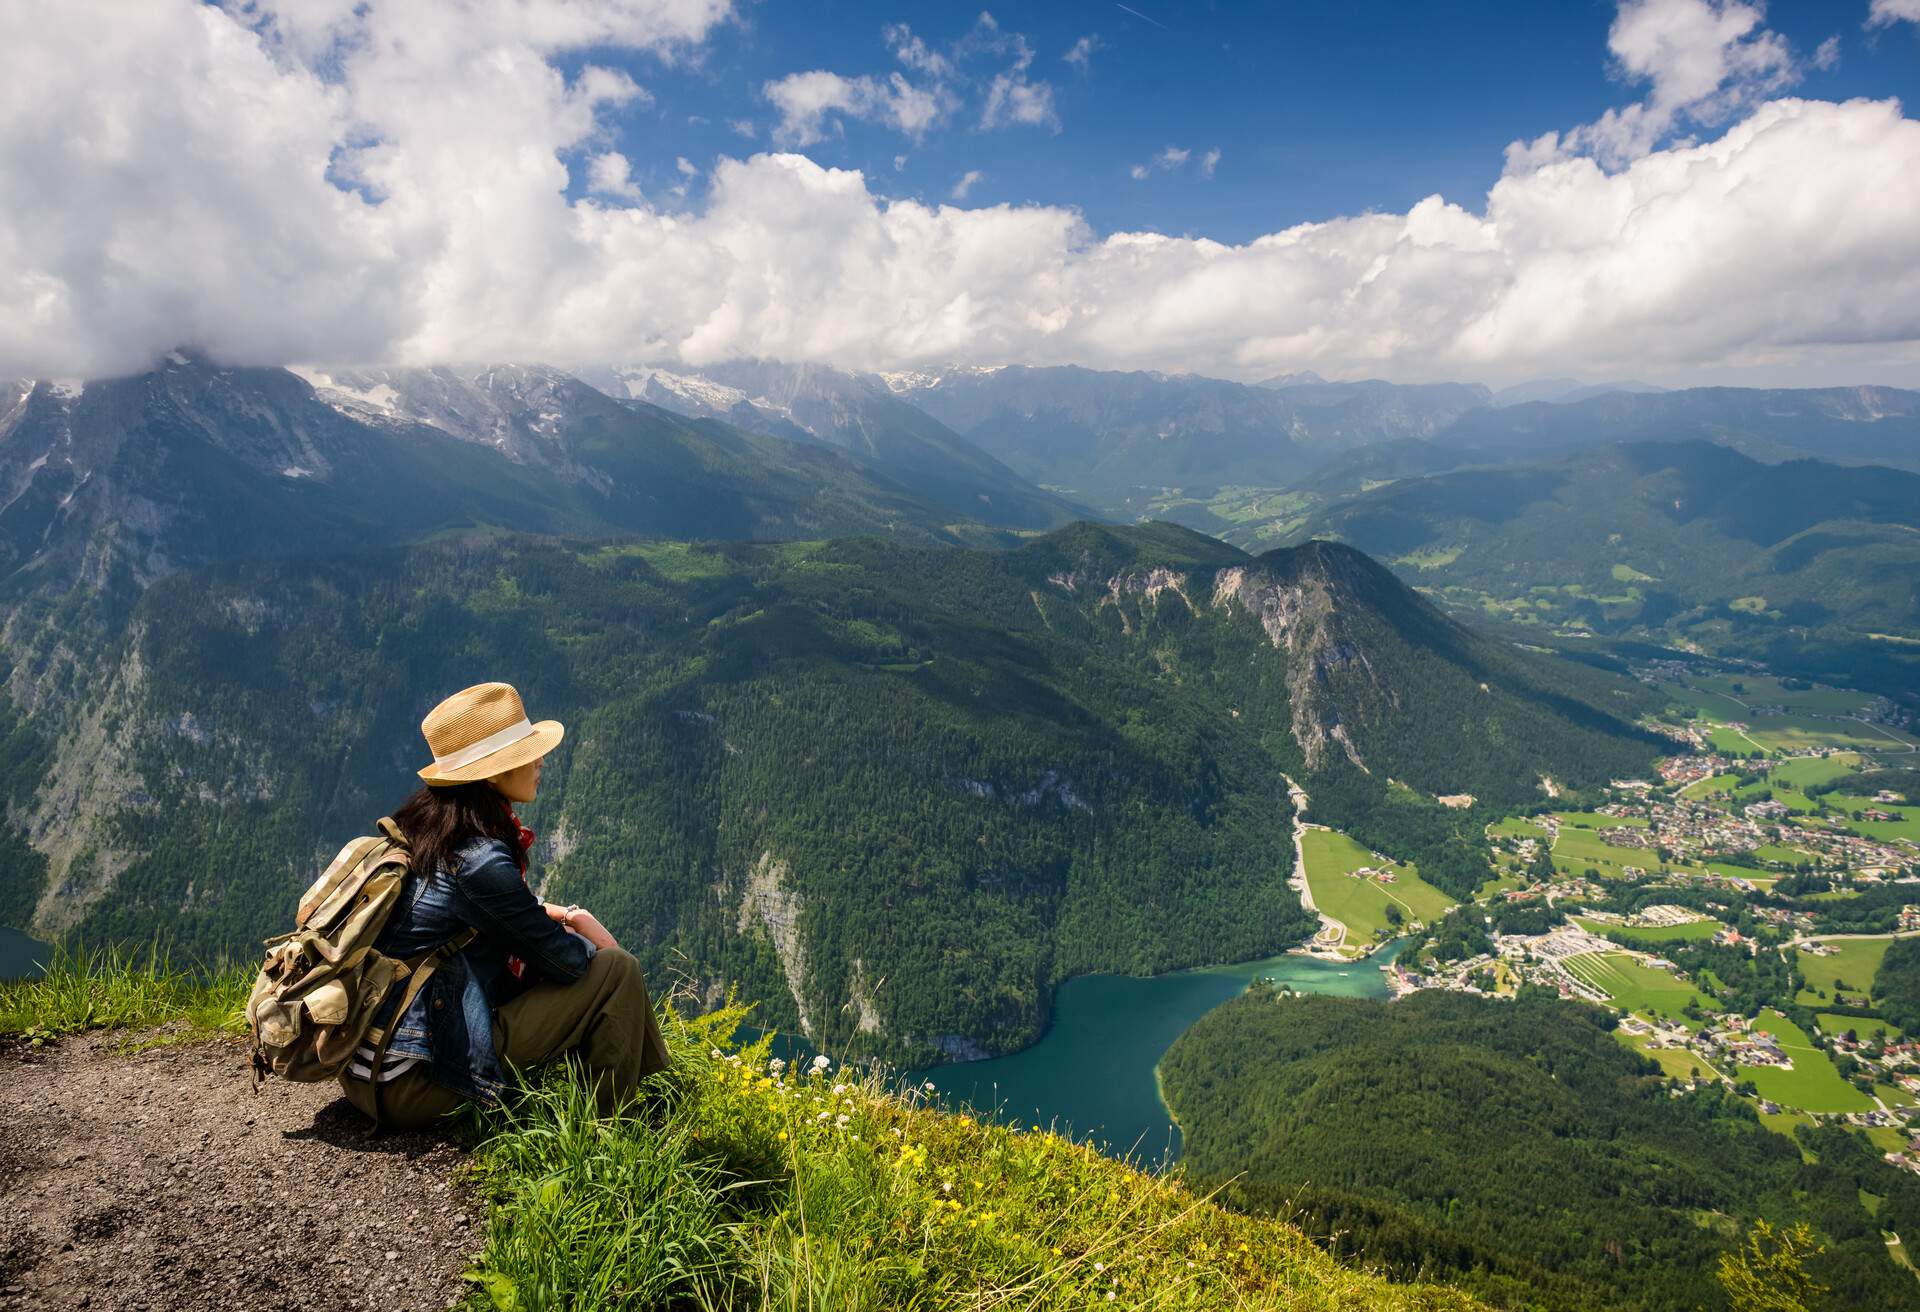 Overlooking view of the Lake Konigssee from Jenner peak, Bavaria, Germany.